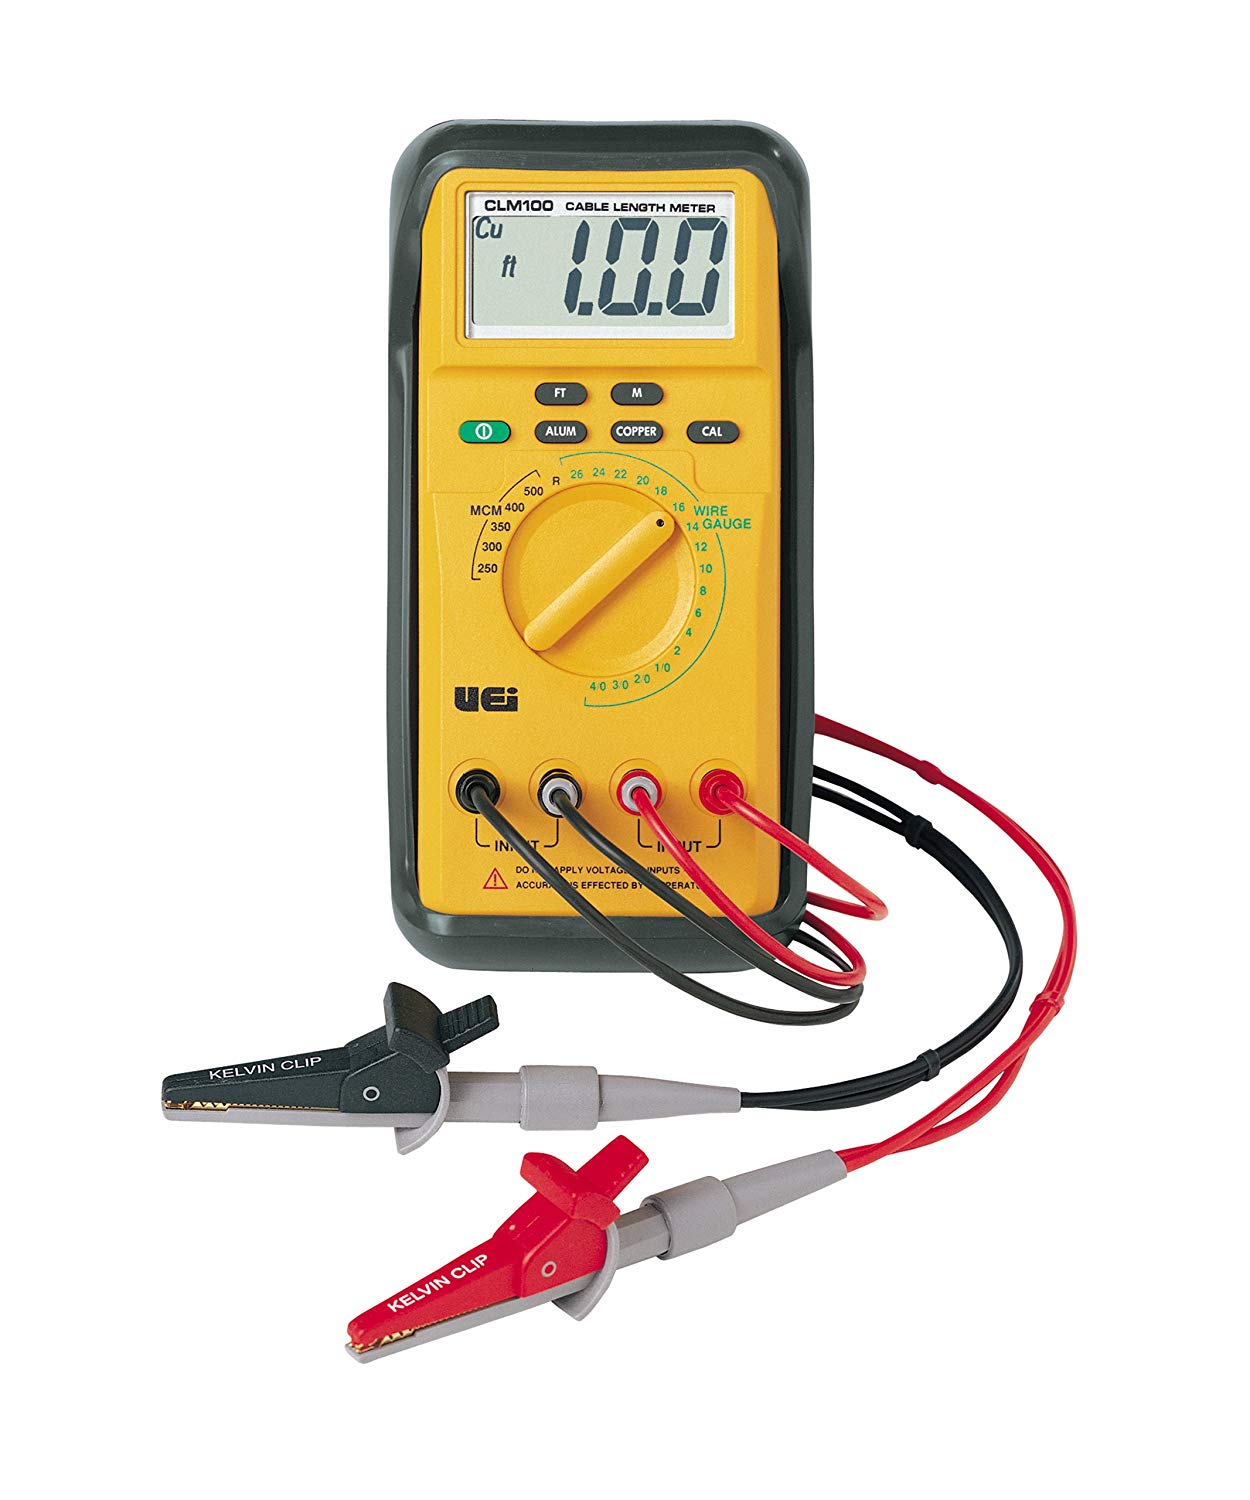 Uei Test Instruments Cable Length Meter, Measures ft  CLM100 - image 1 of 1